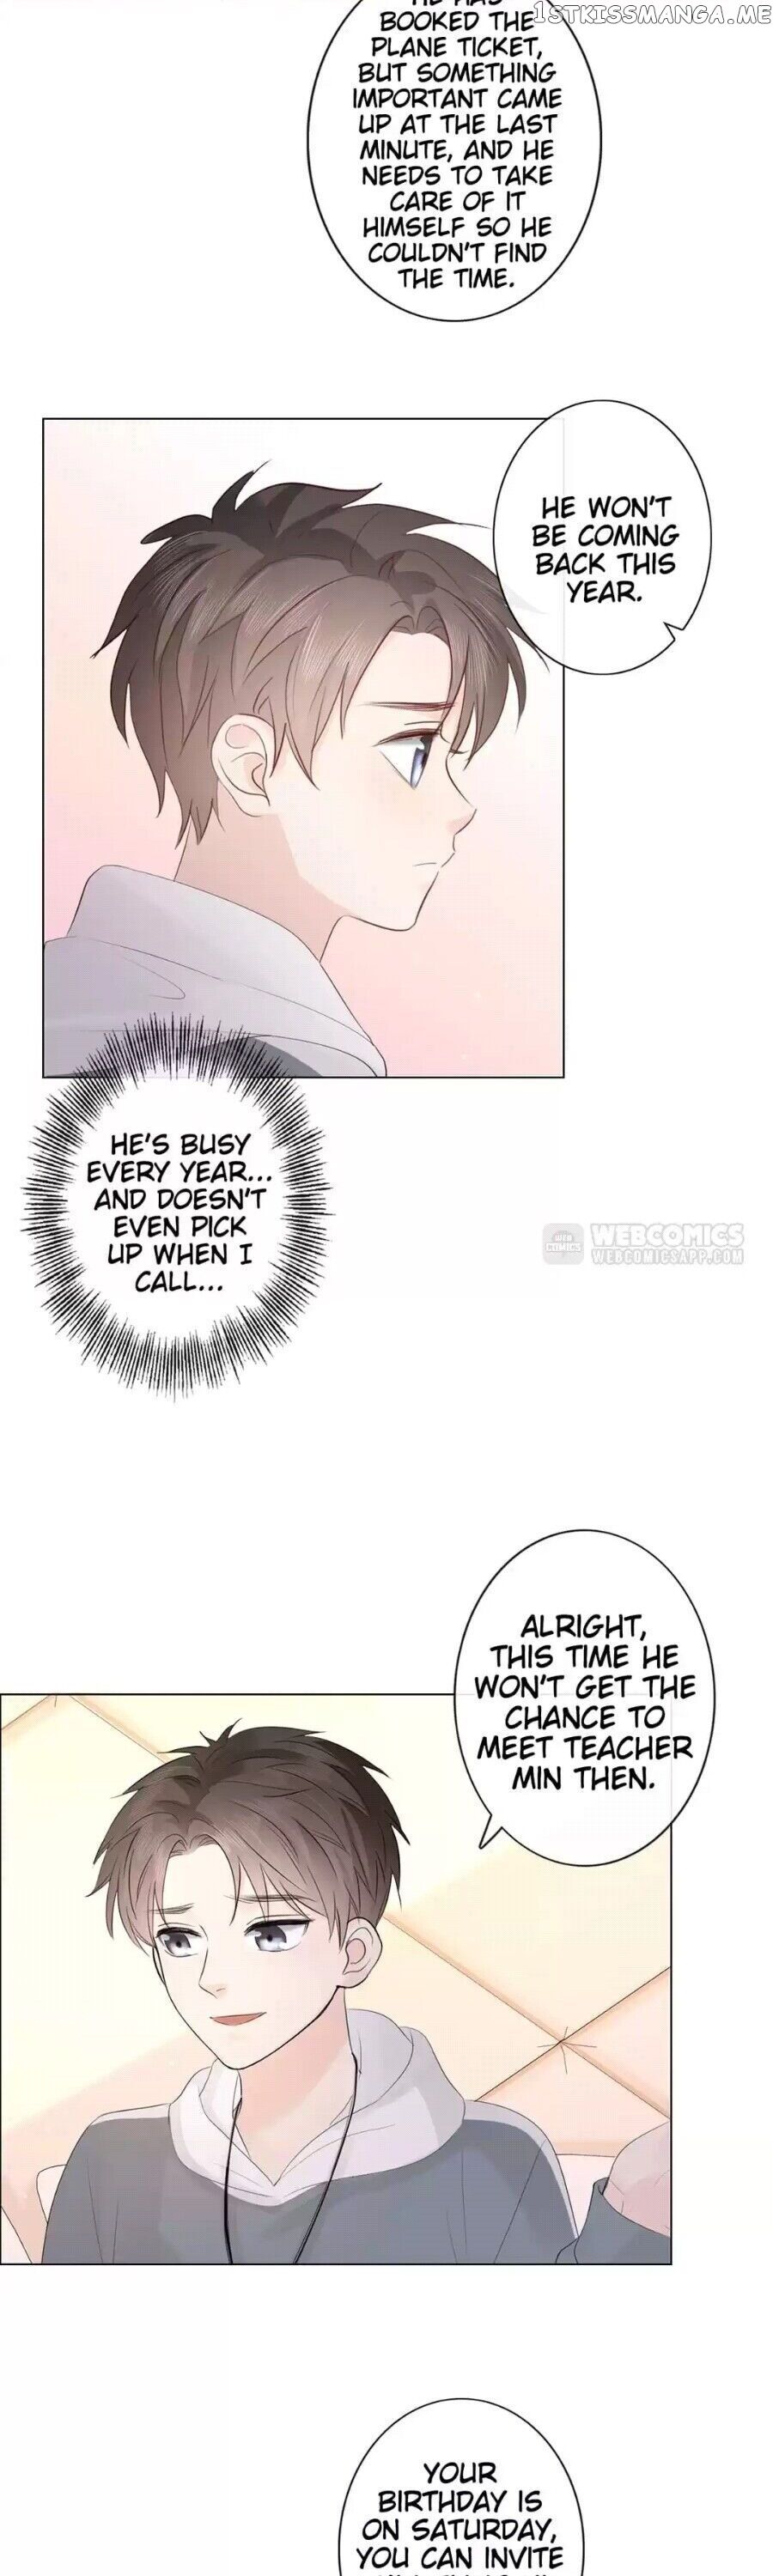 She is Mine chapter 46 - Page 6